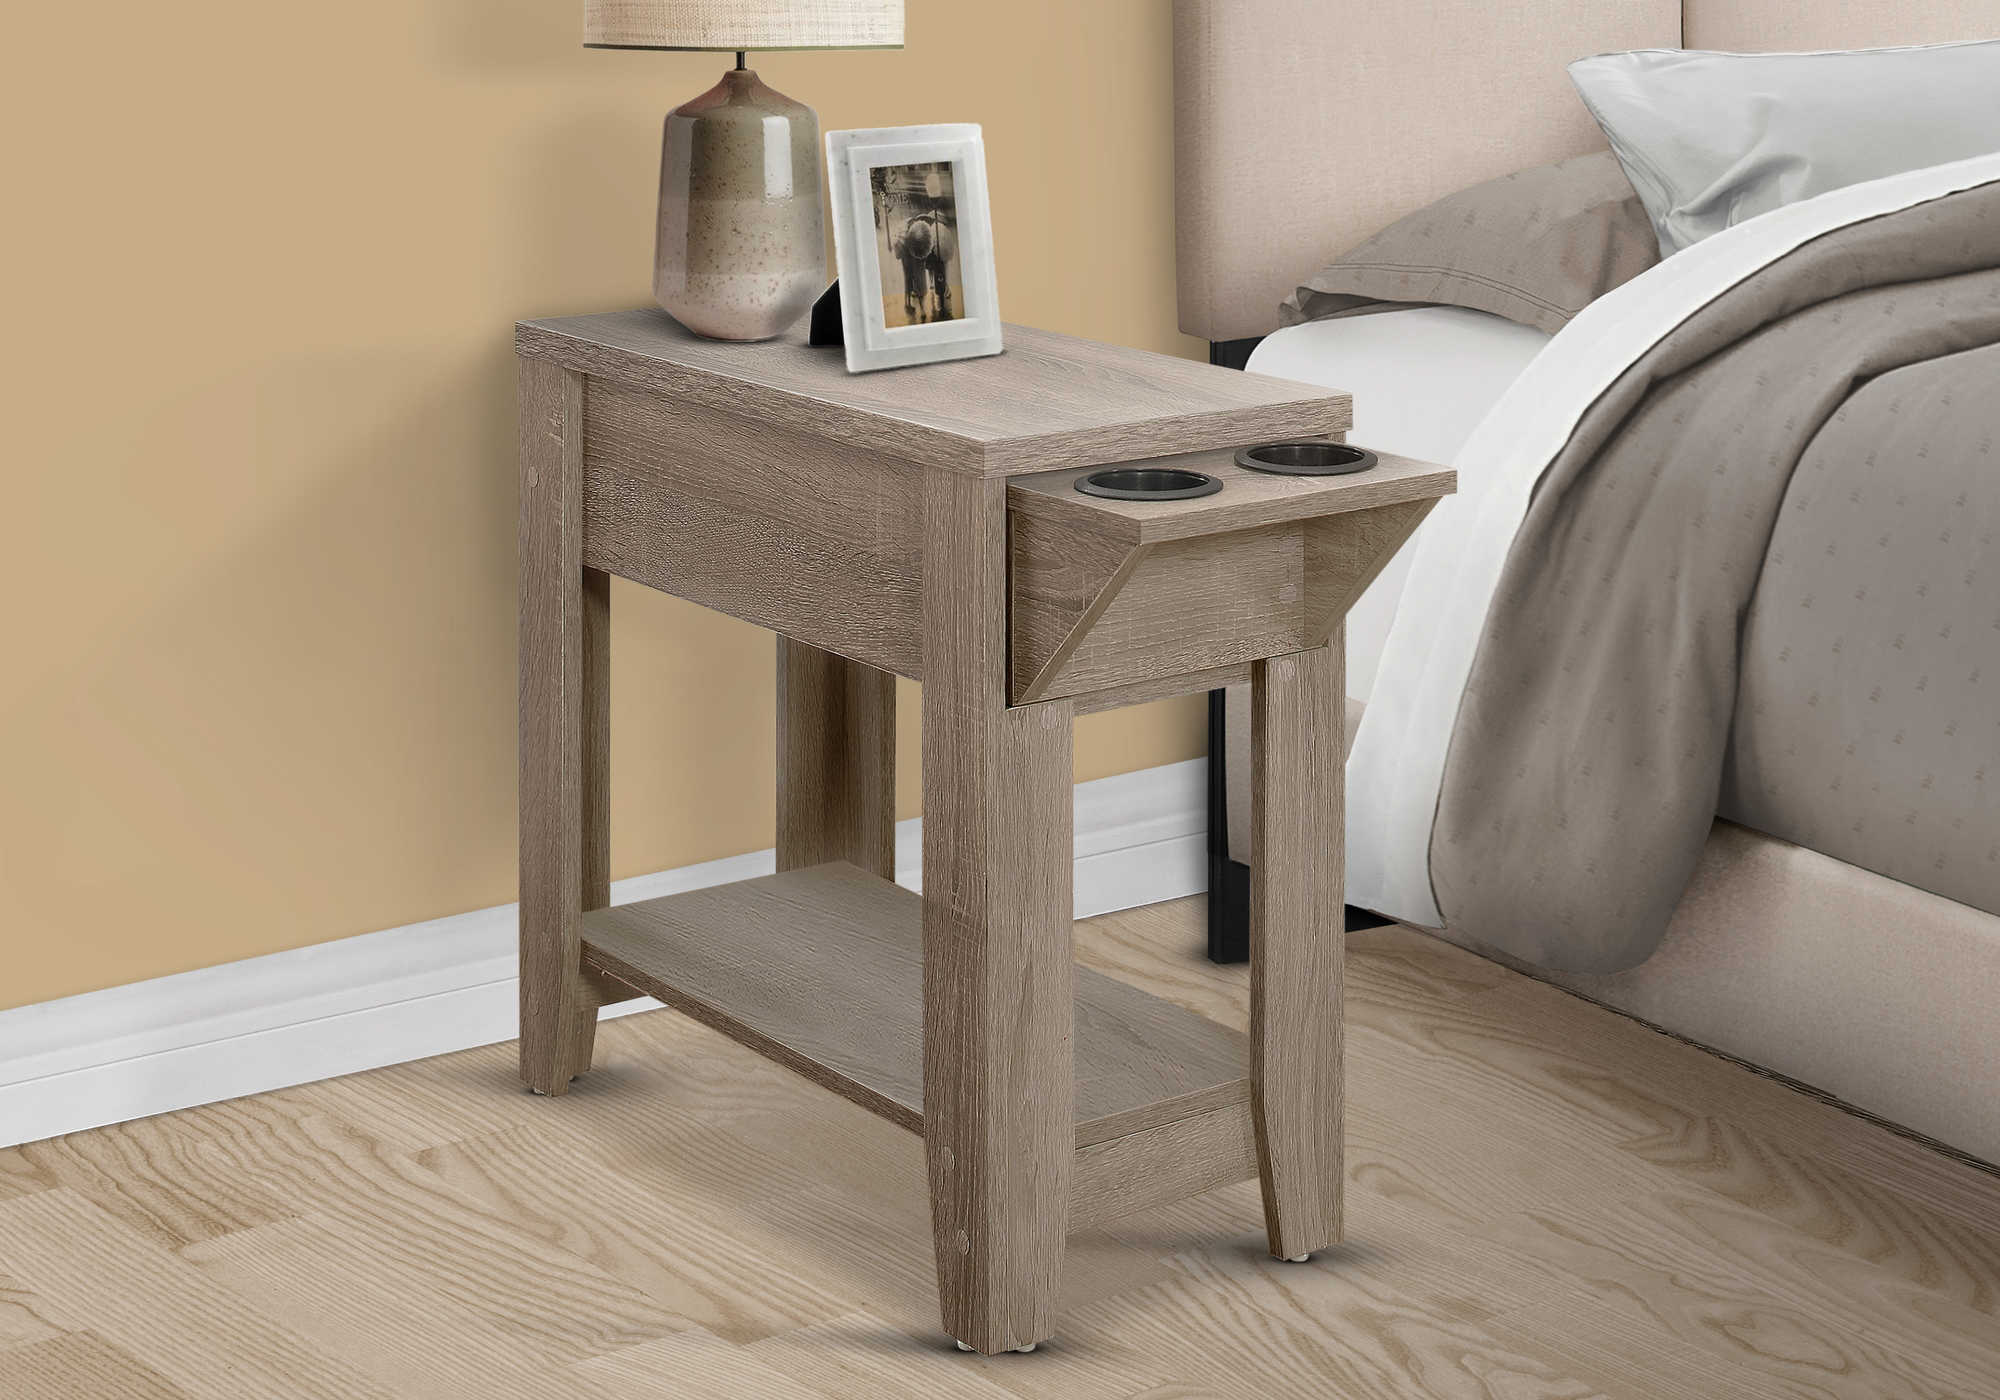 nightstand - 23"h / dark taupe with a glass holder i3198